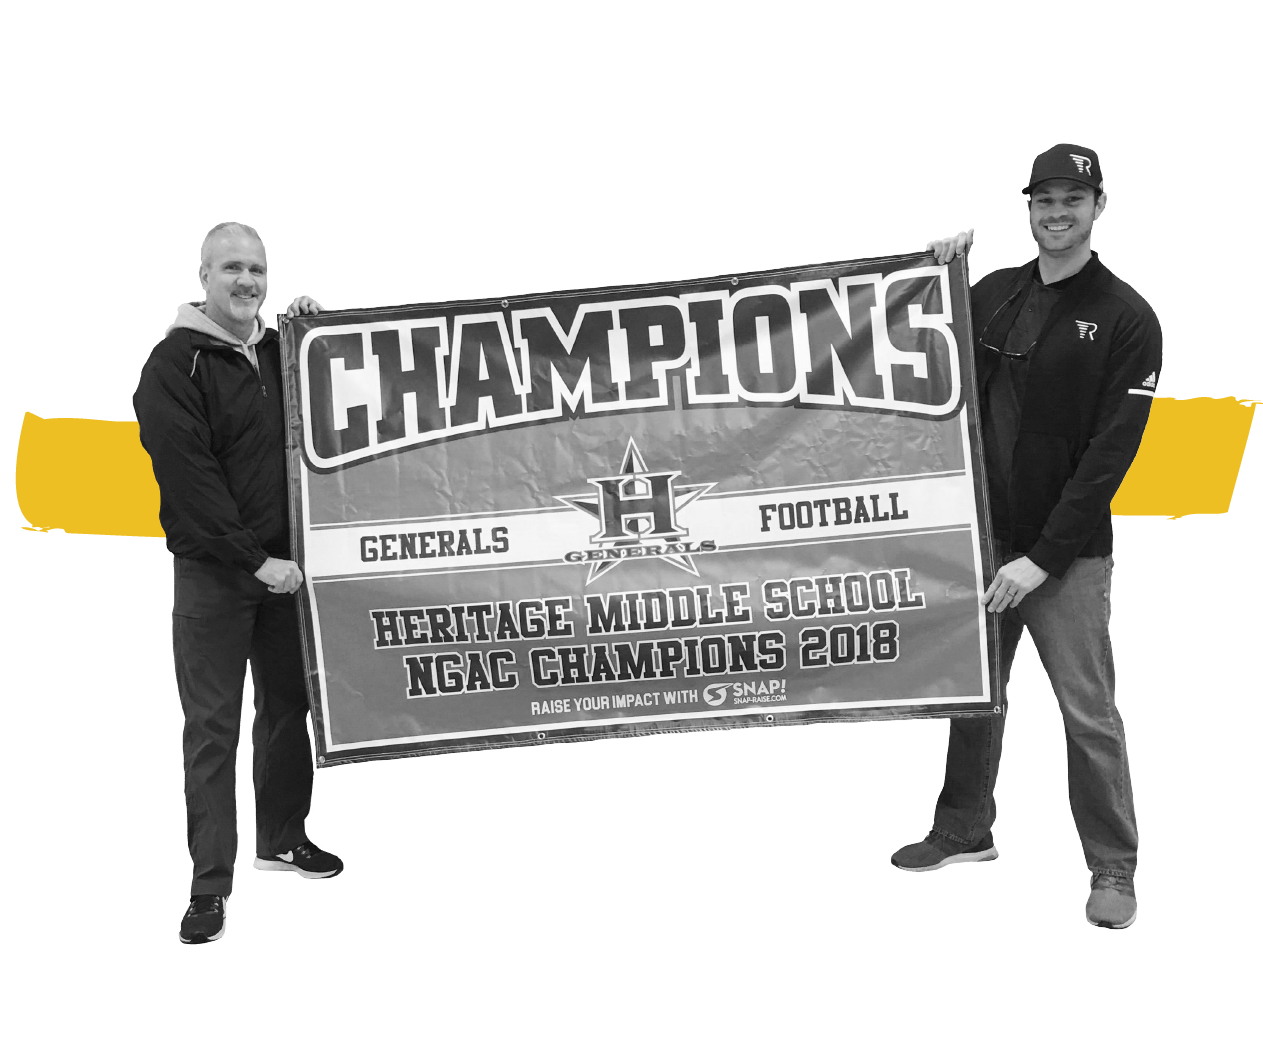 Displaying Heritage Middle School 2018 Championship Banner